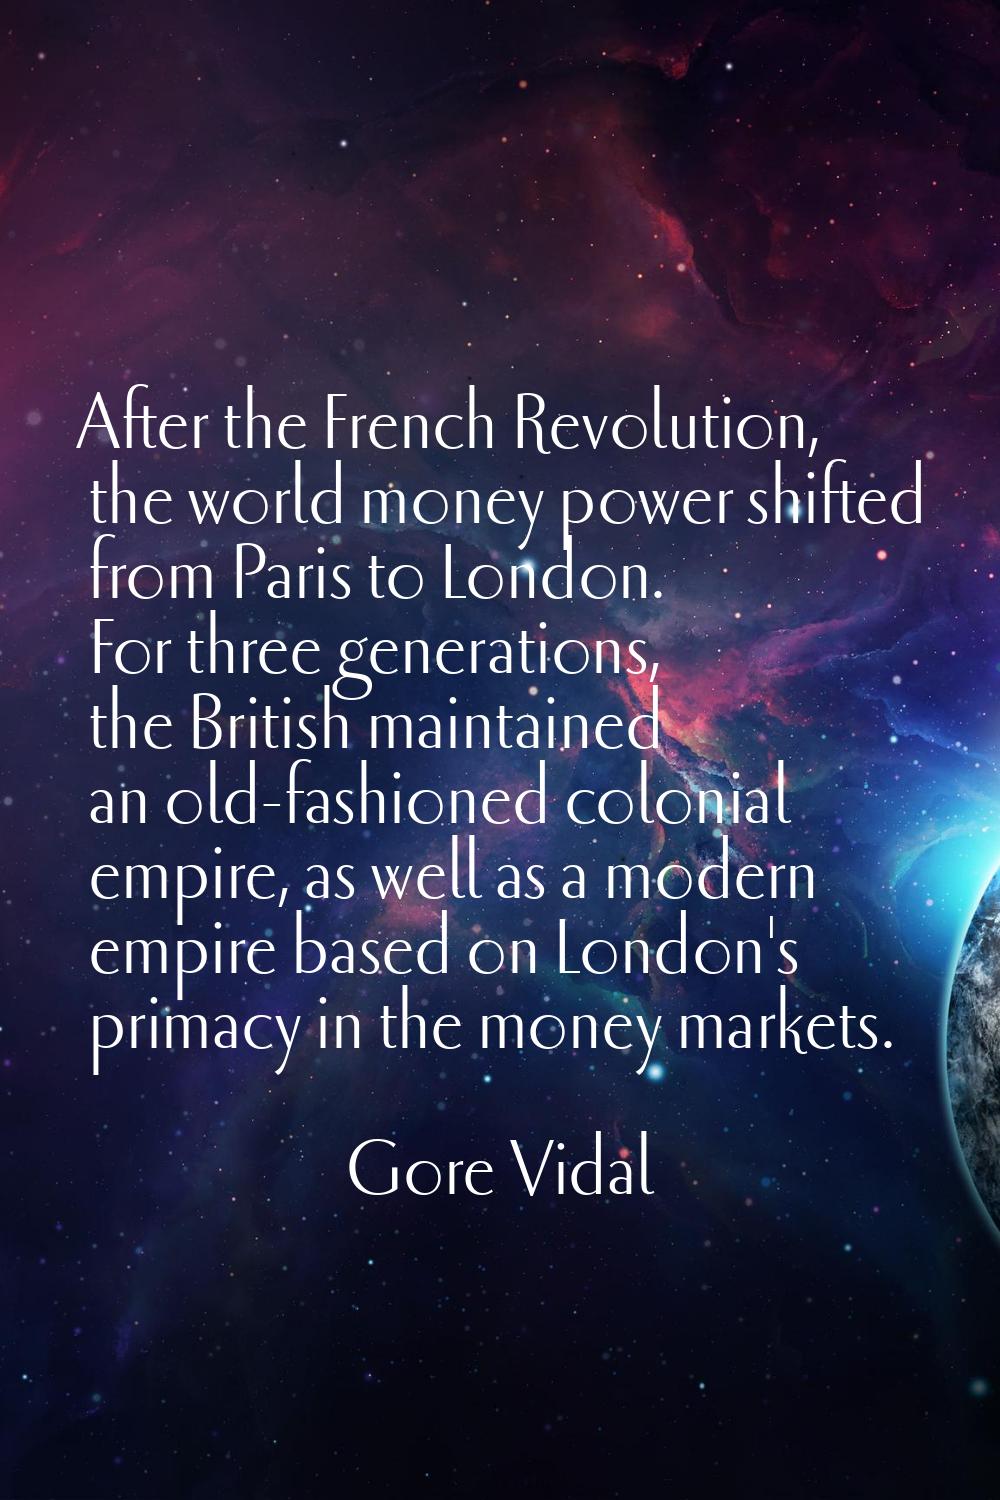 After the French Revolution, the world money power shifted from Paris to London. For three generati